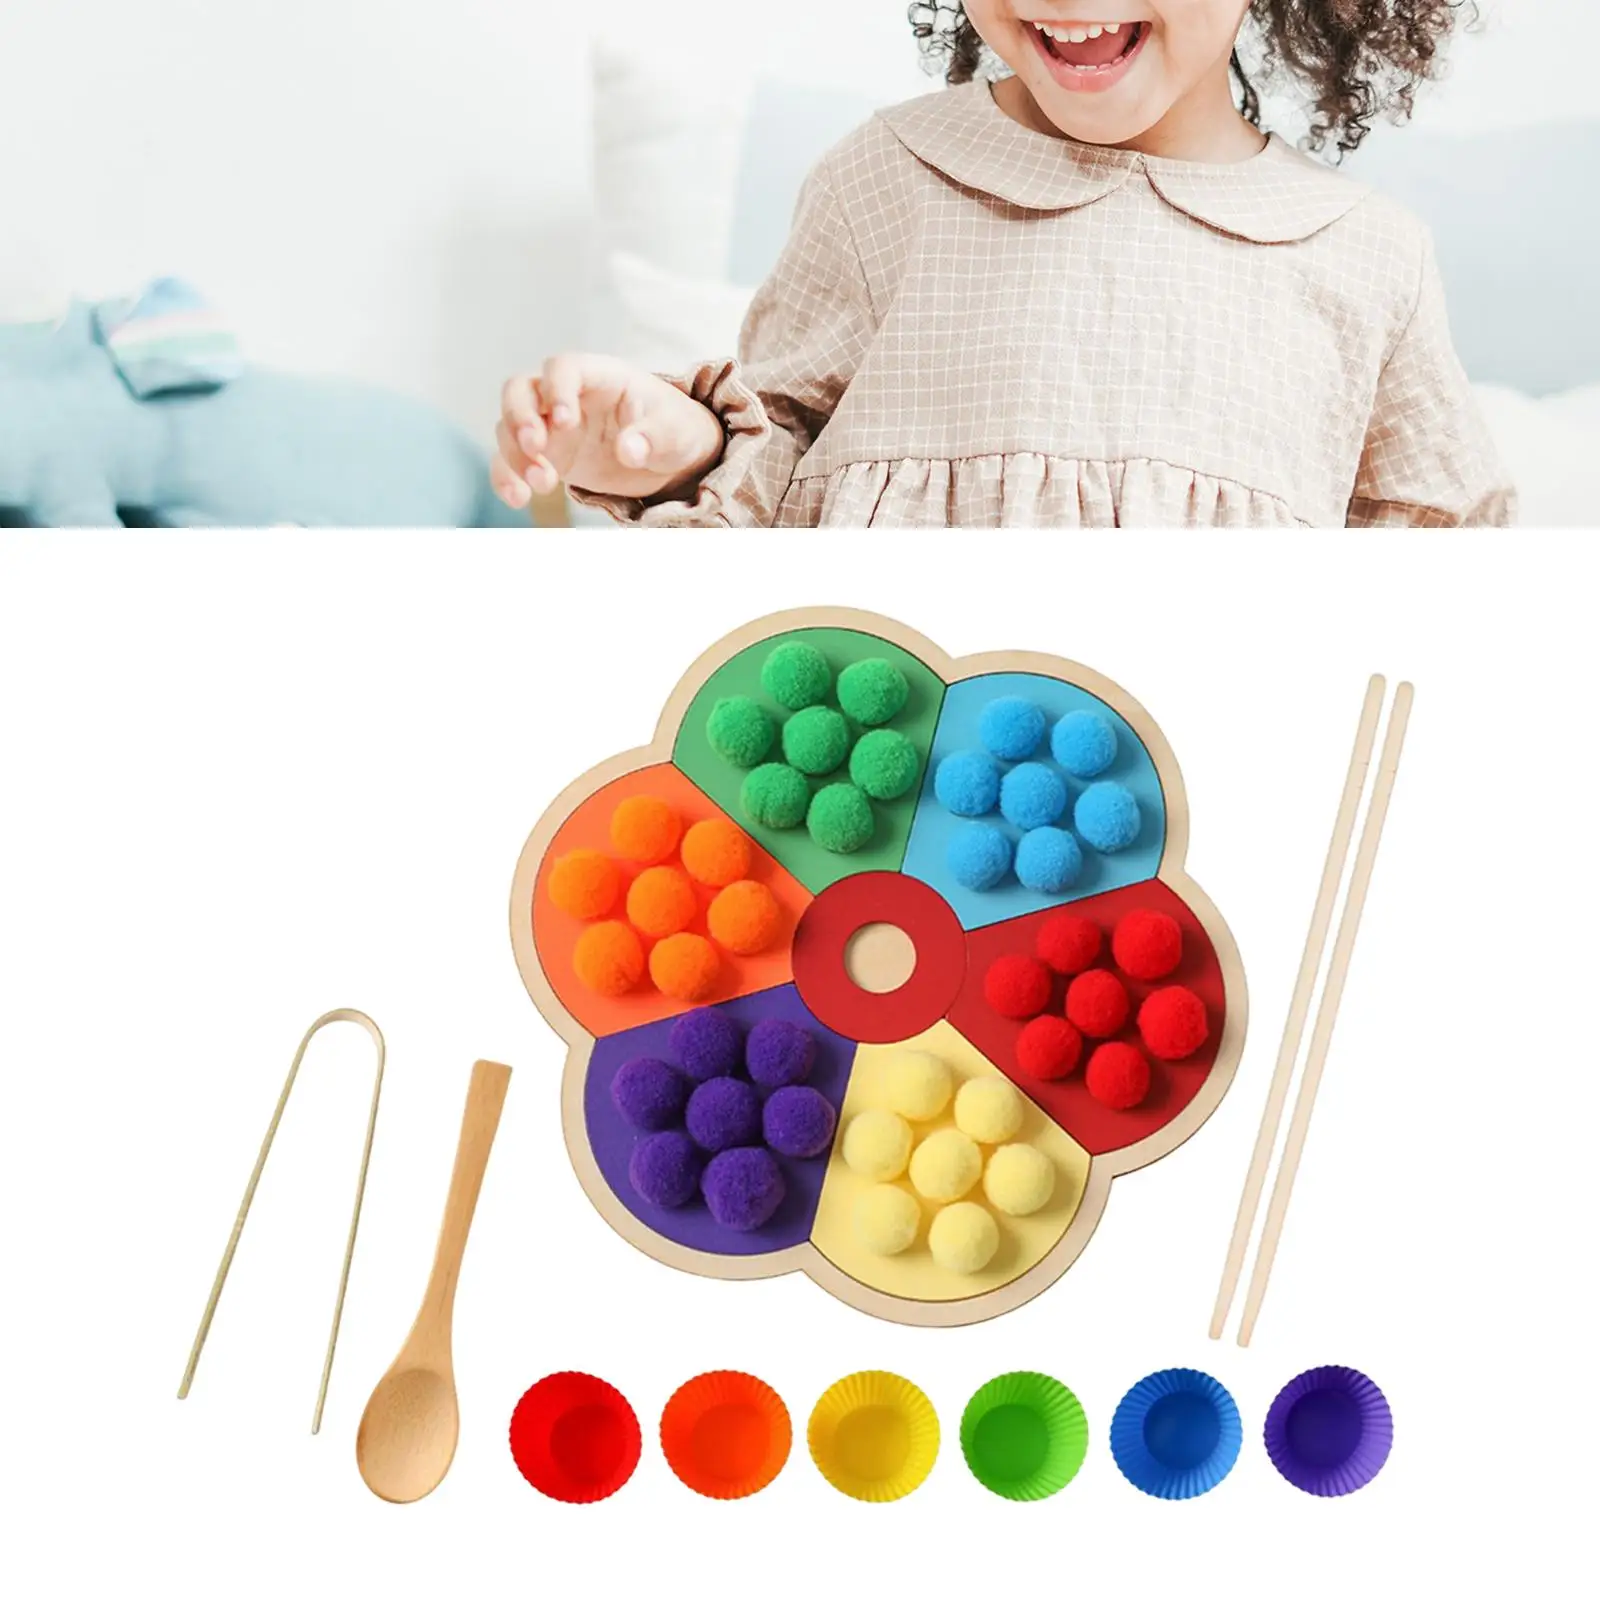 Rainbow Peg Board Sorter Game Sensory Toys Fine Motor Skill Counting Toys for Girls Gifts